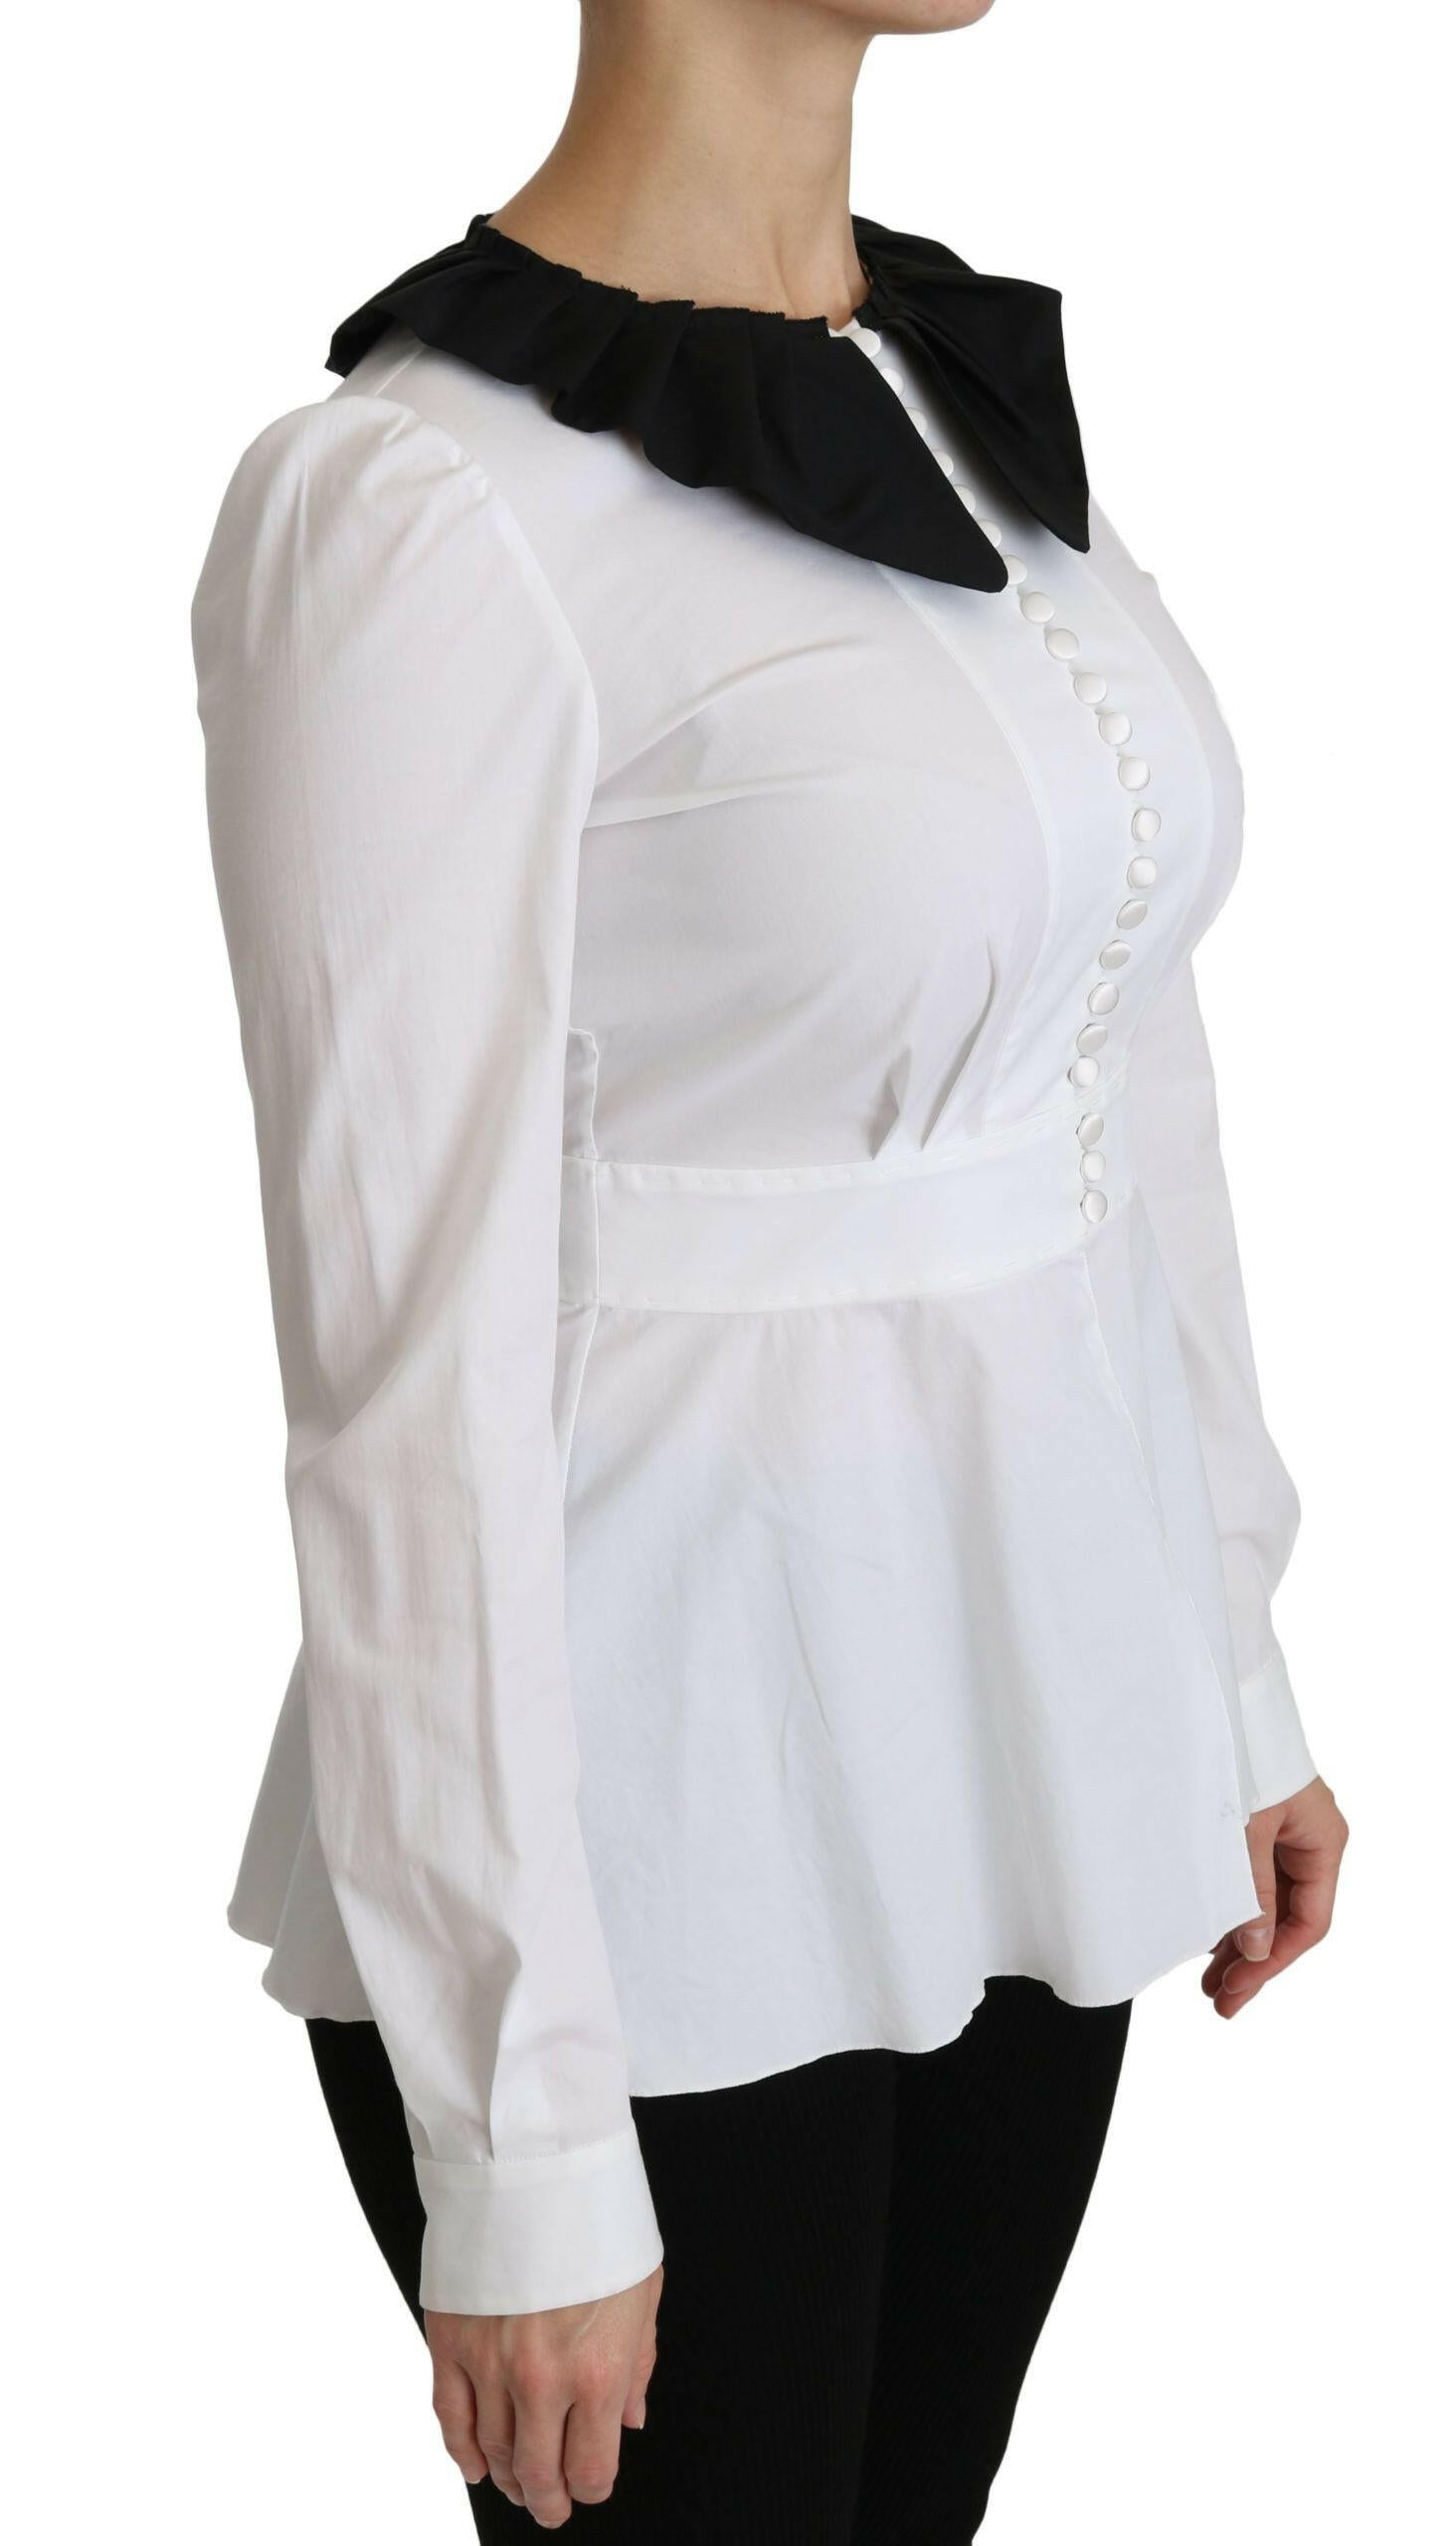 Dolce & Gabbana White Collared Long Sleeve Blouse Cotton Top - GENUINE AUTHENTIC BRAND LLC  